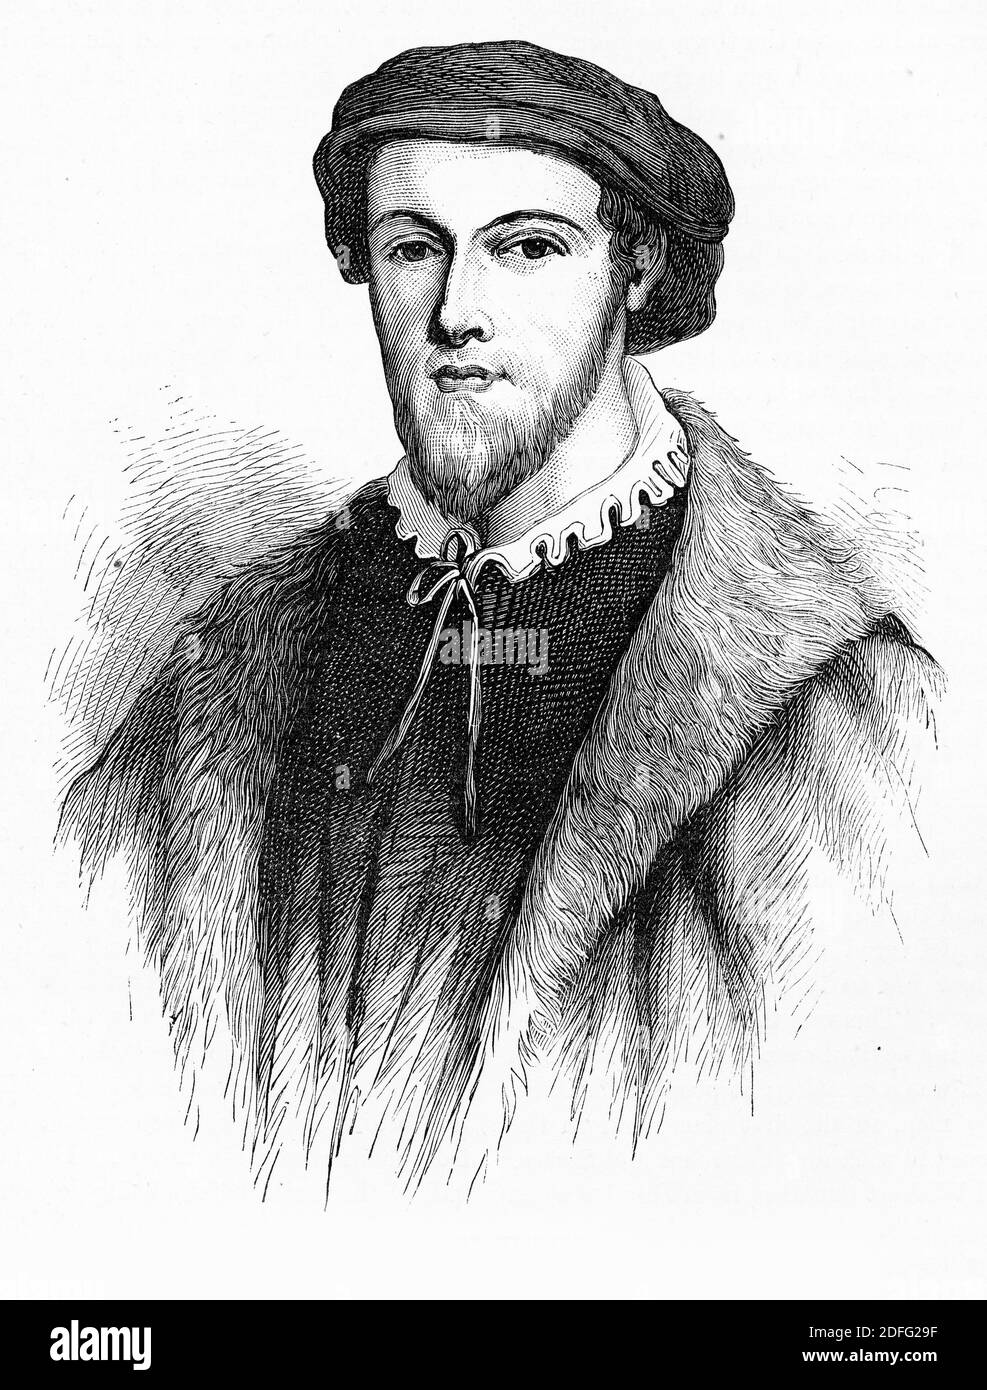 Engraving of George Wishart (c1530-1540, (1890) Scottish Protestant Reformer, early Protestant martyr burned at the stake as a heretic.Illustration from 'The history of Protestantism' by James Aitken Wylie (1808-1890), pub. 1878 Stock Photo